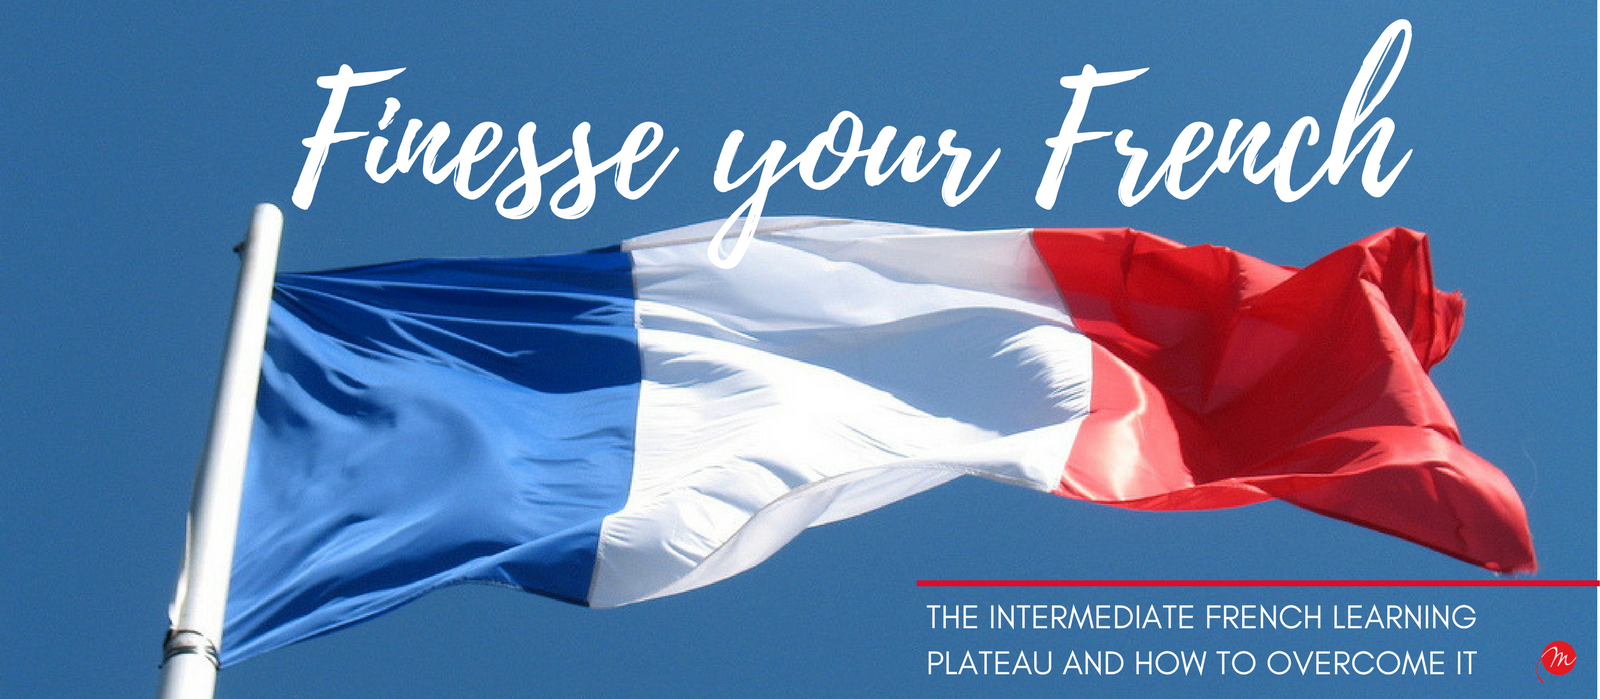 MyFrenchLife™ – MyFrenchLife.org - French learning plateau - finesse your French - intermediate learning plateau - learn French - language plateau - Flag